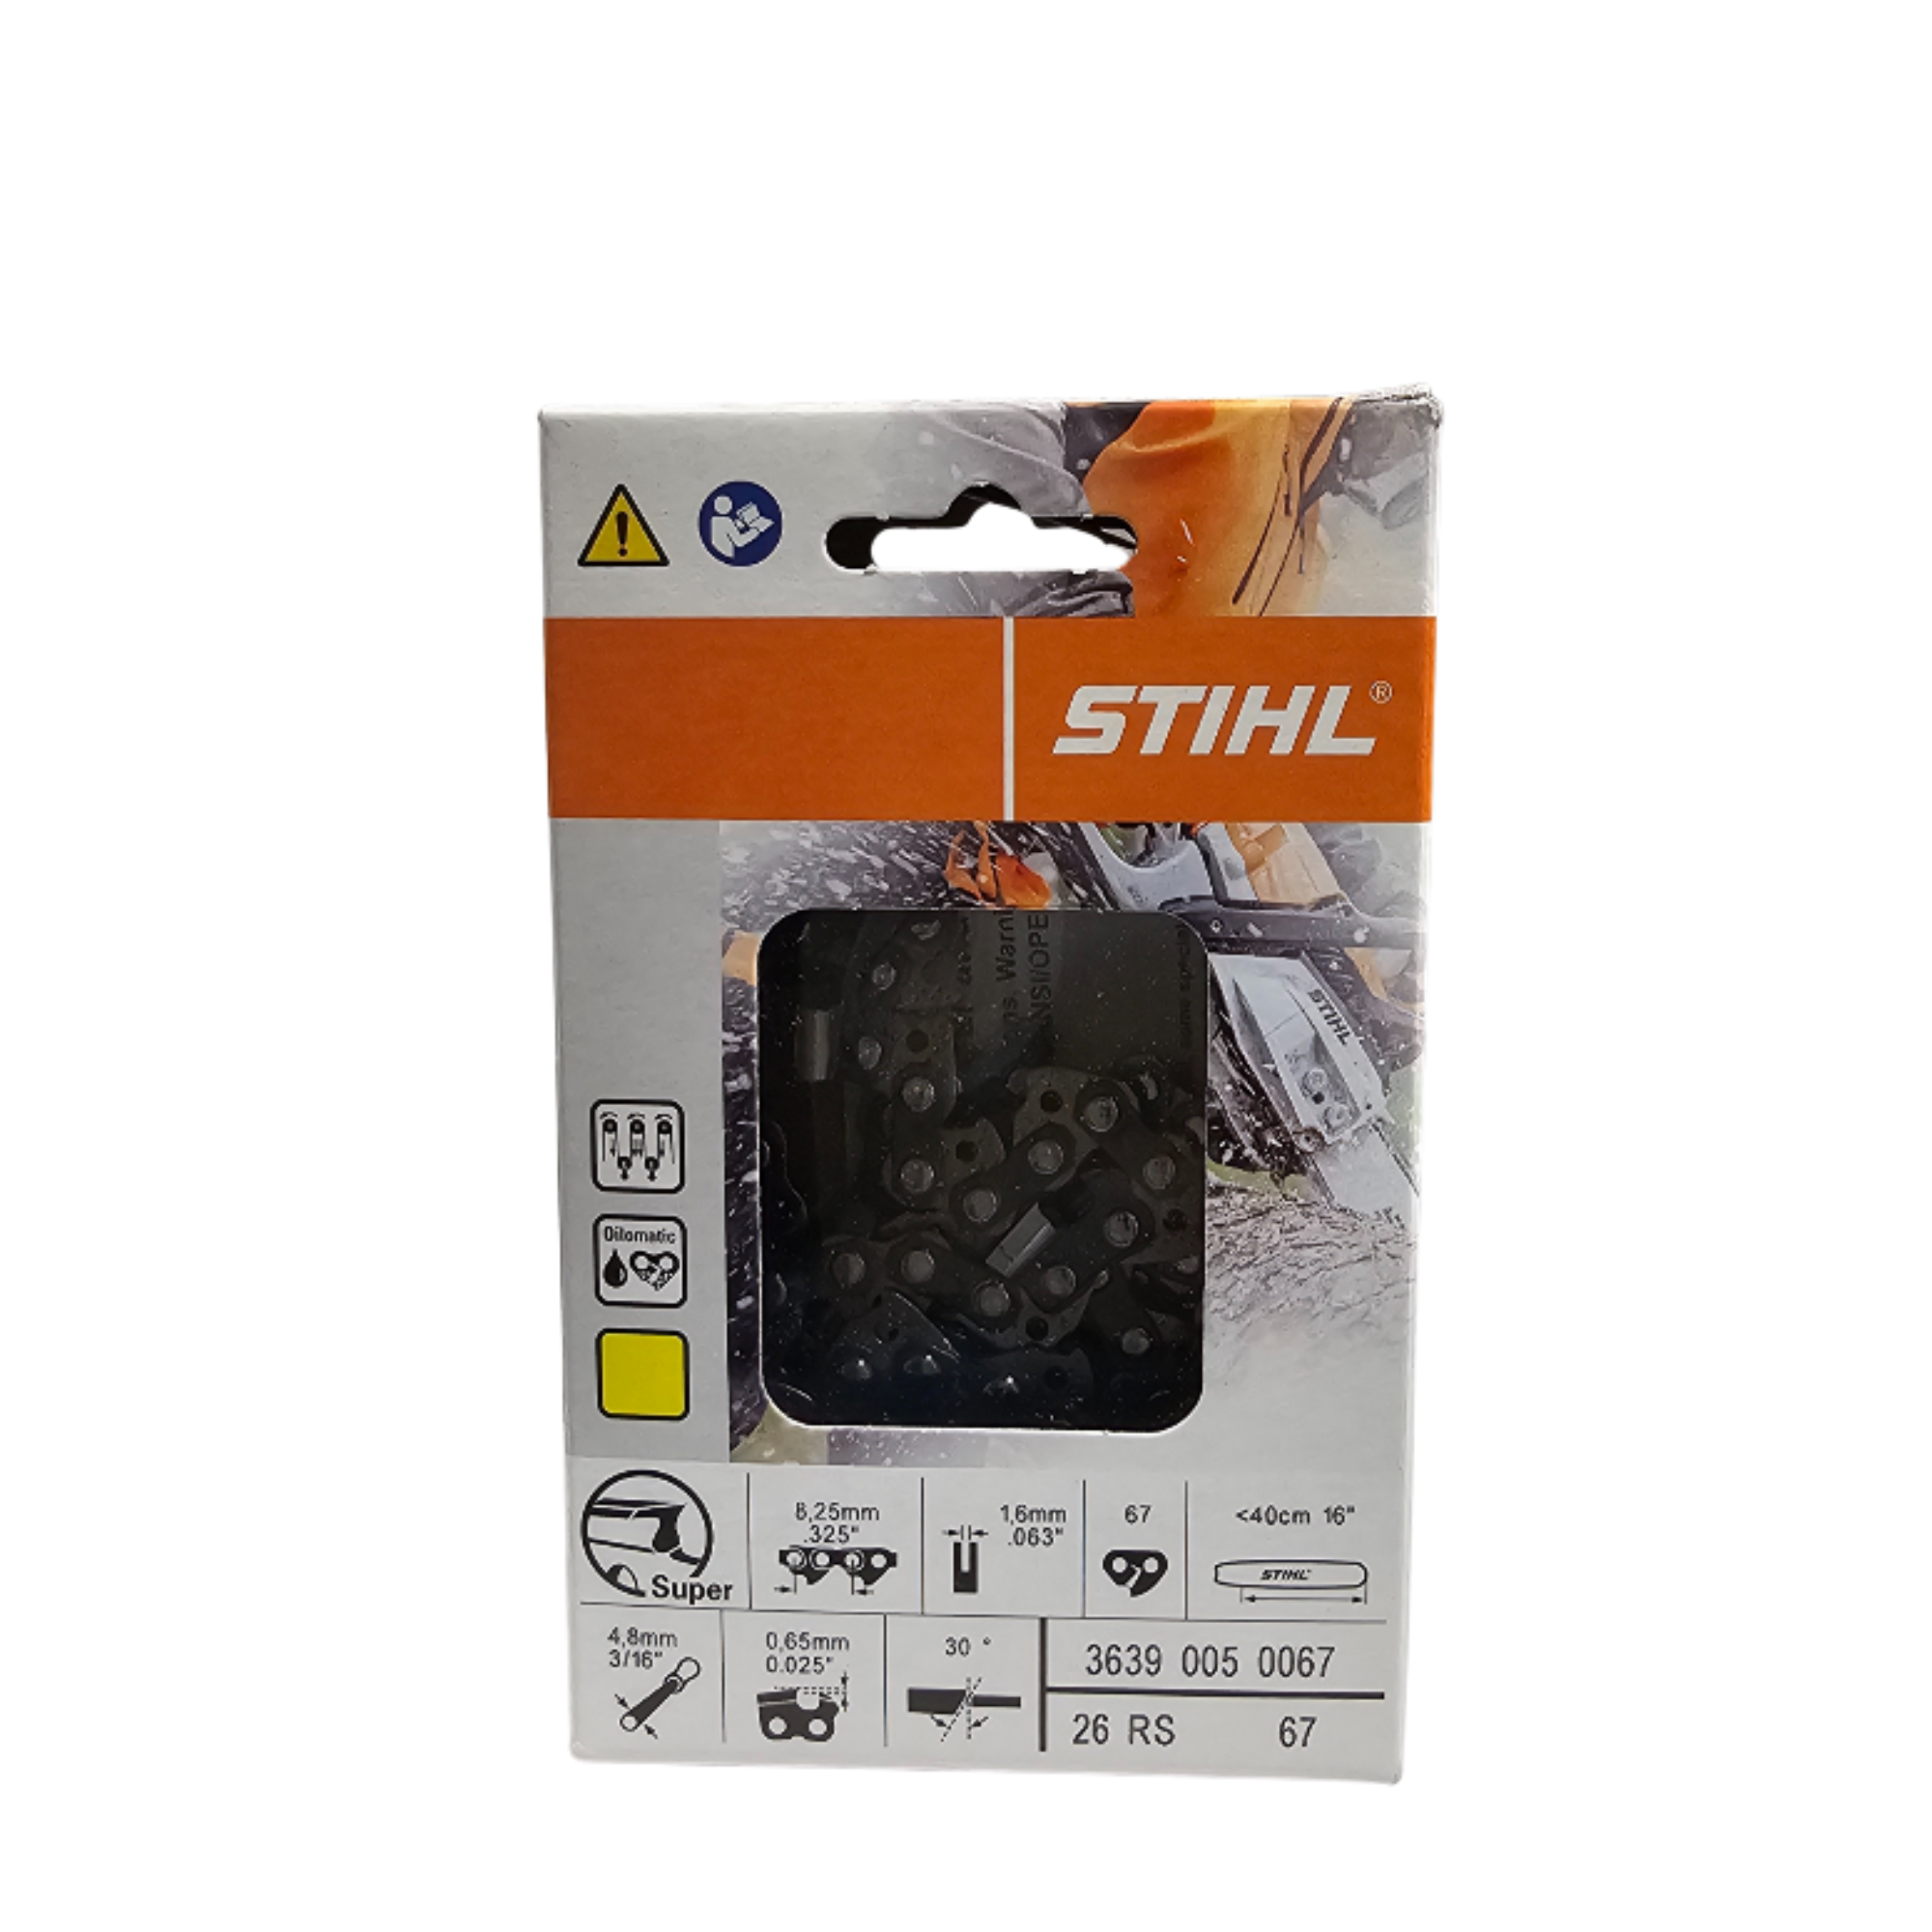 STIHL Oilomatic Rapid Super | 26 RS 67 | 16 in. | 67 Drive Links | Chainsaw Chain | 3639 005 0067